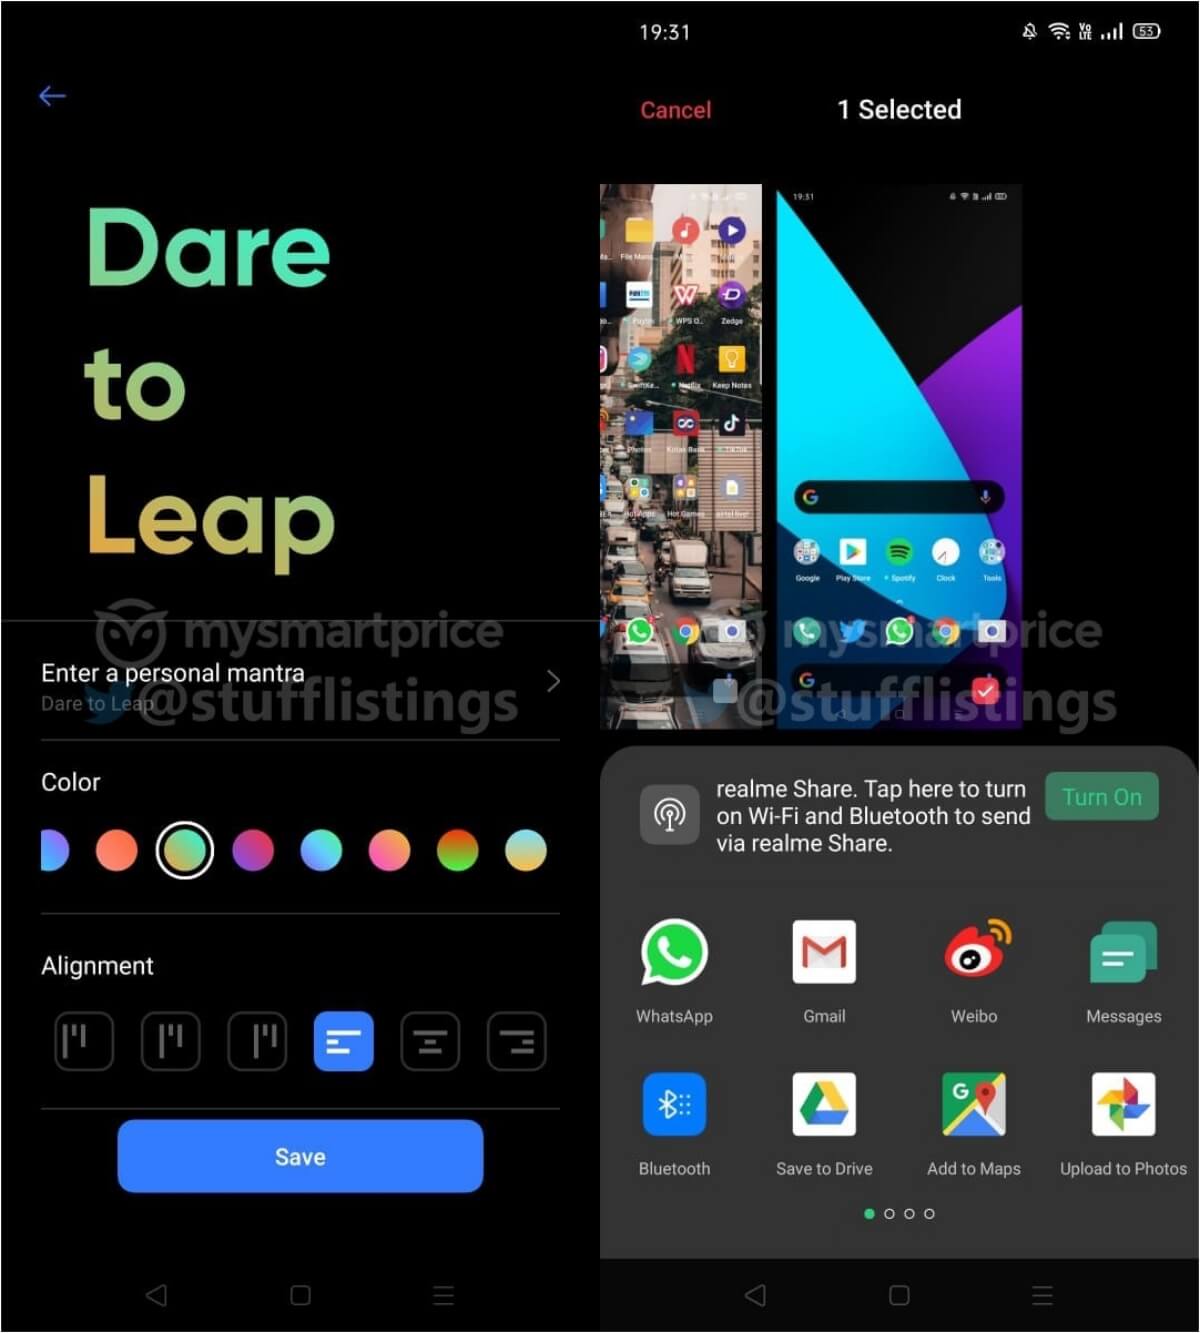 realme X2 Pro Android 10 realme UI What is new ColorOS 7